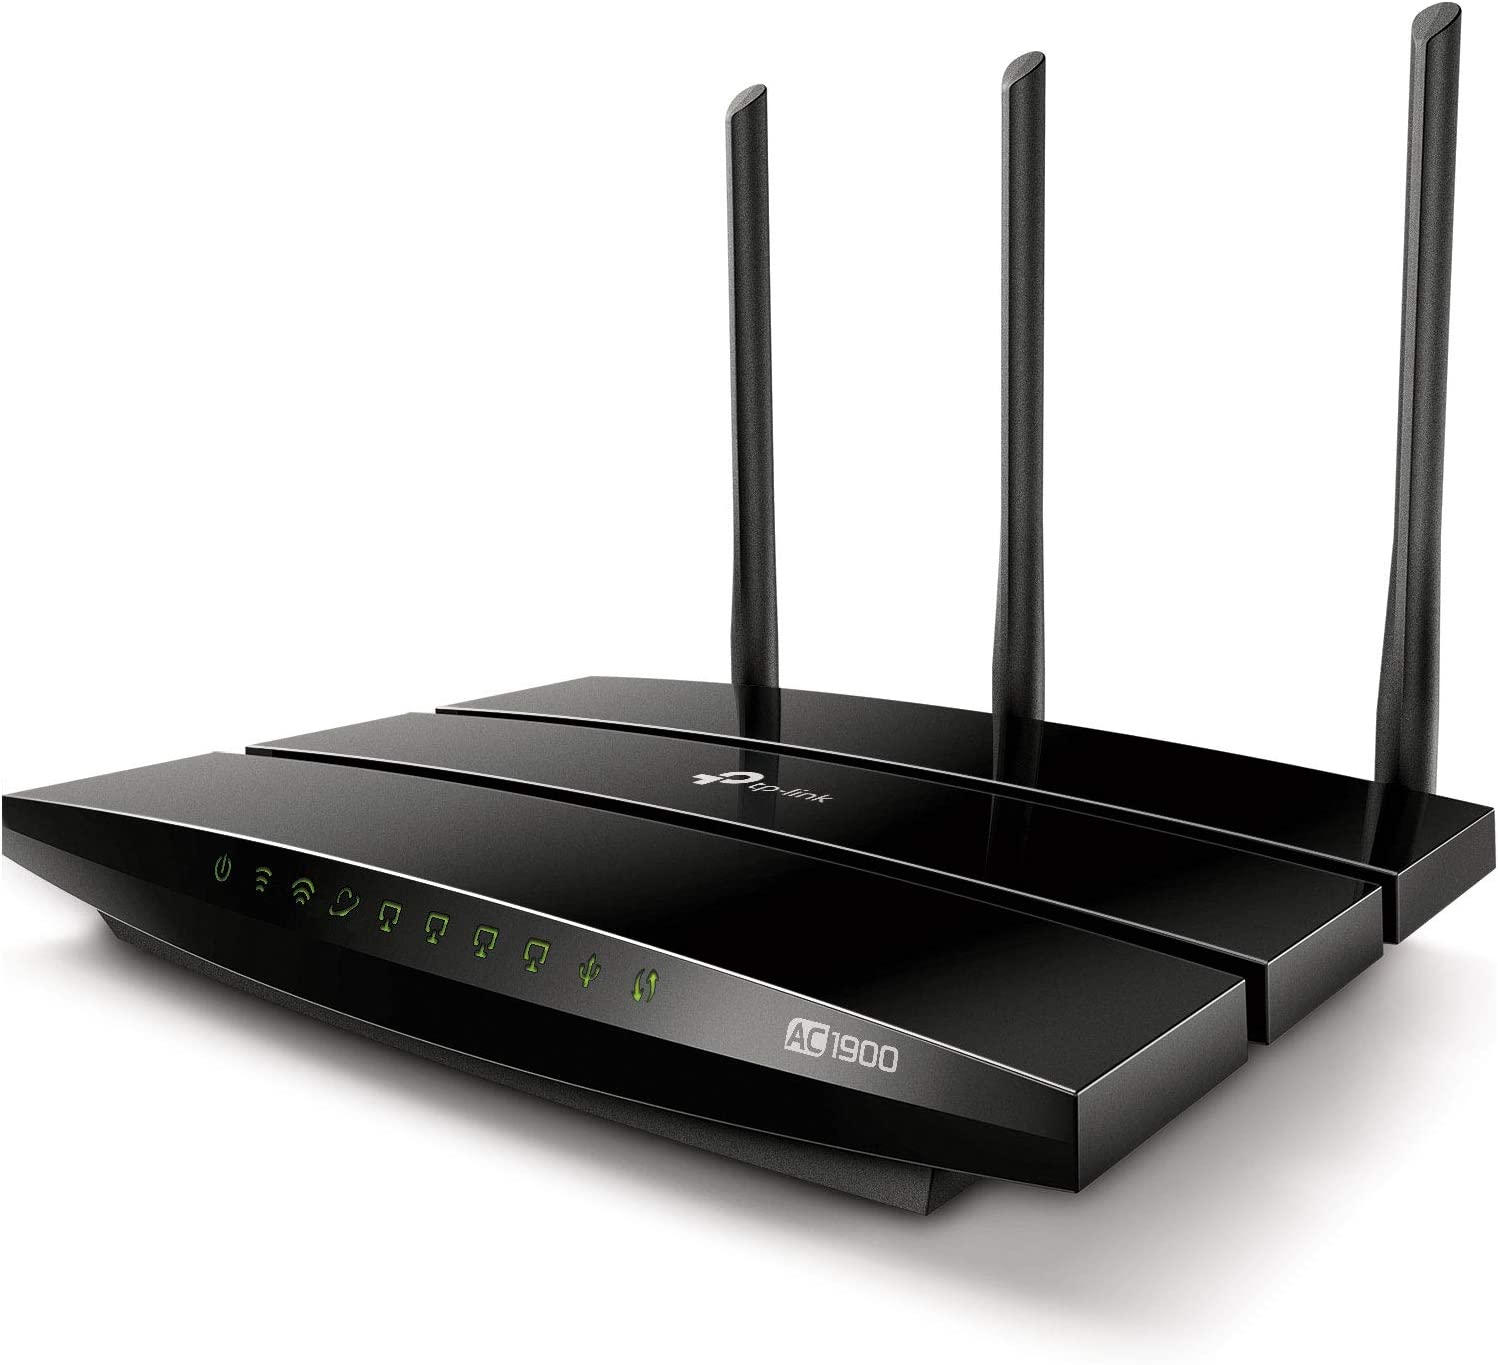 TP-Link - AC1900 Archer A9 Smart WiFi Router High Speed MU-MIMO Gigabit Dual Band Wireless Router